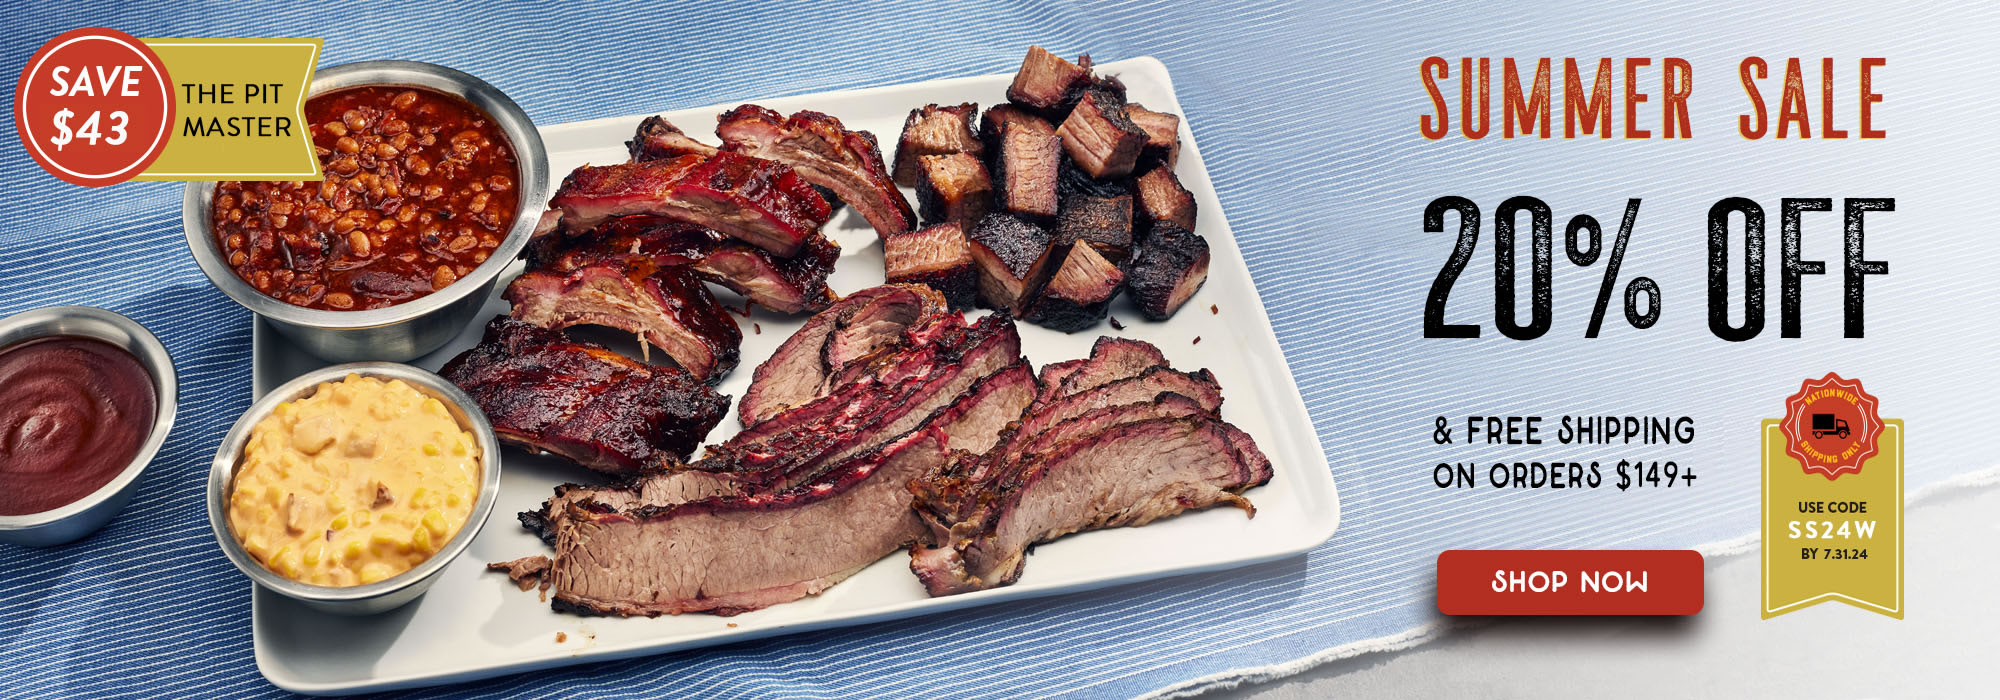 Select Barbecue Packs.  20% off and free shipping on orders $149+ - use code SS24W